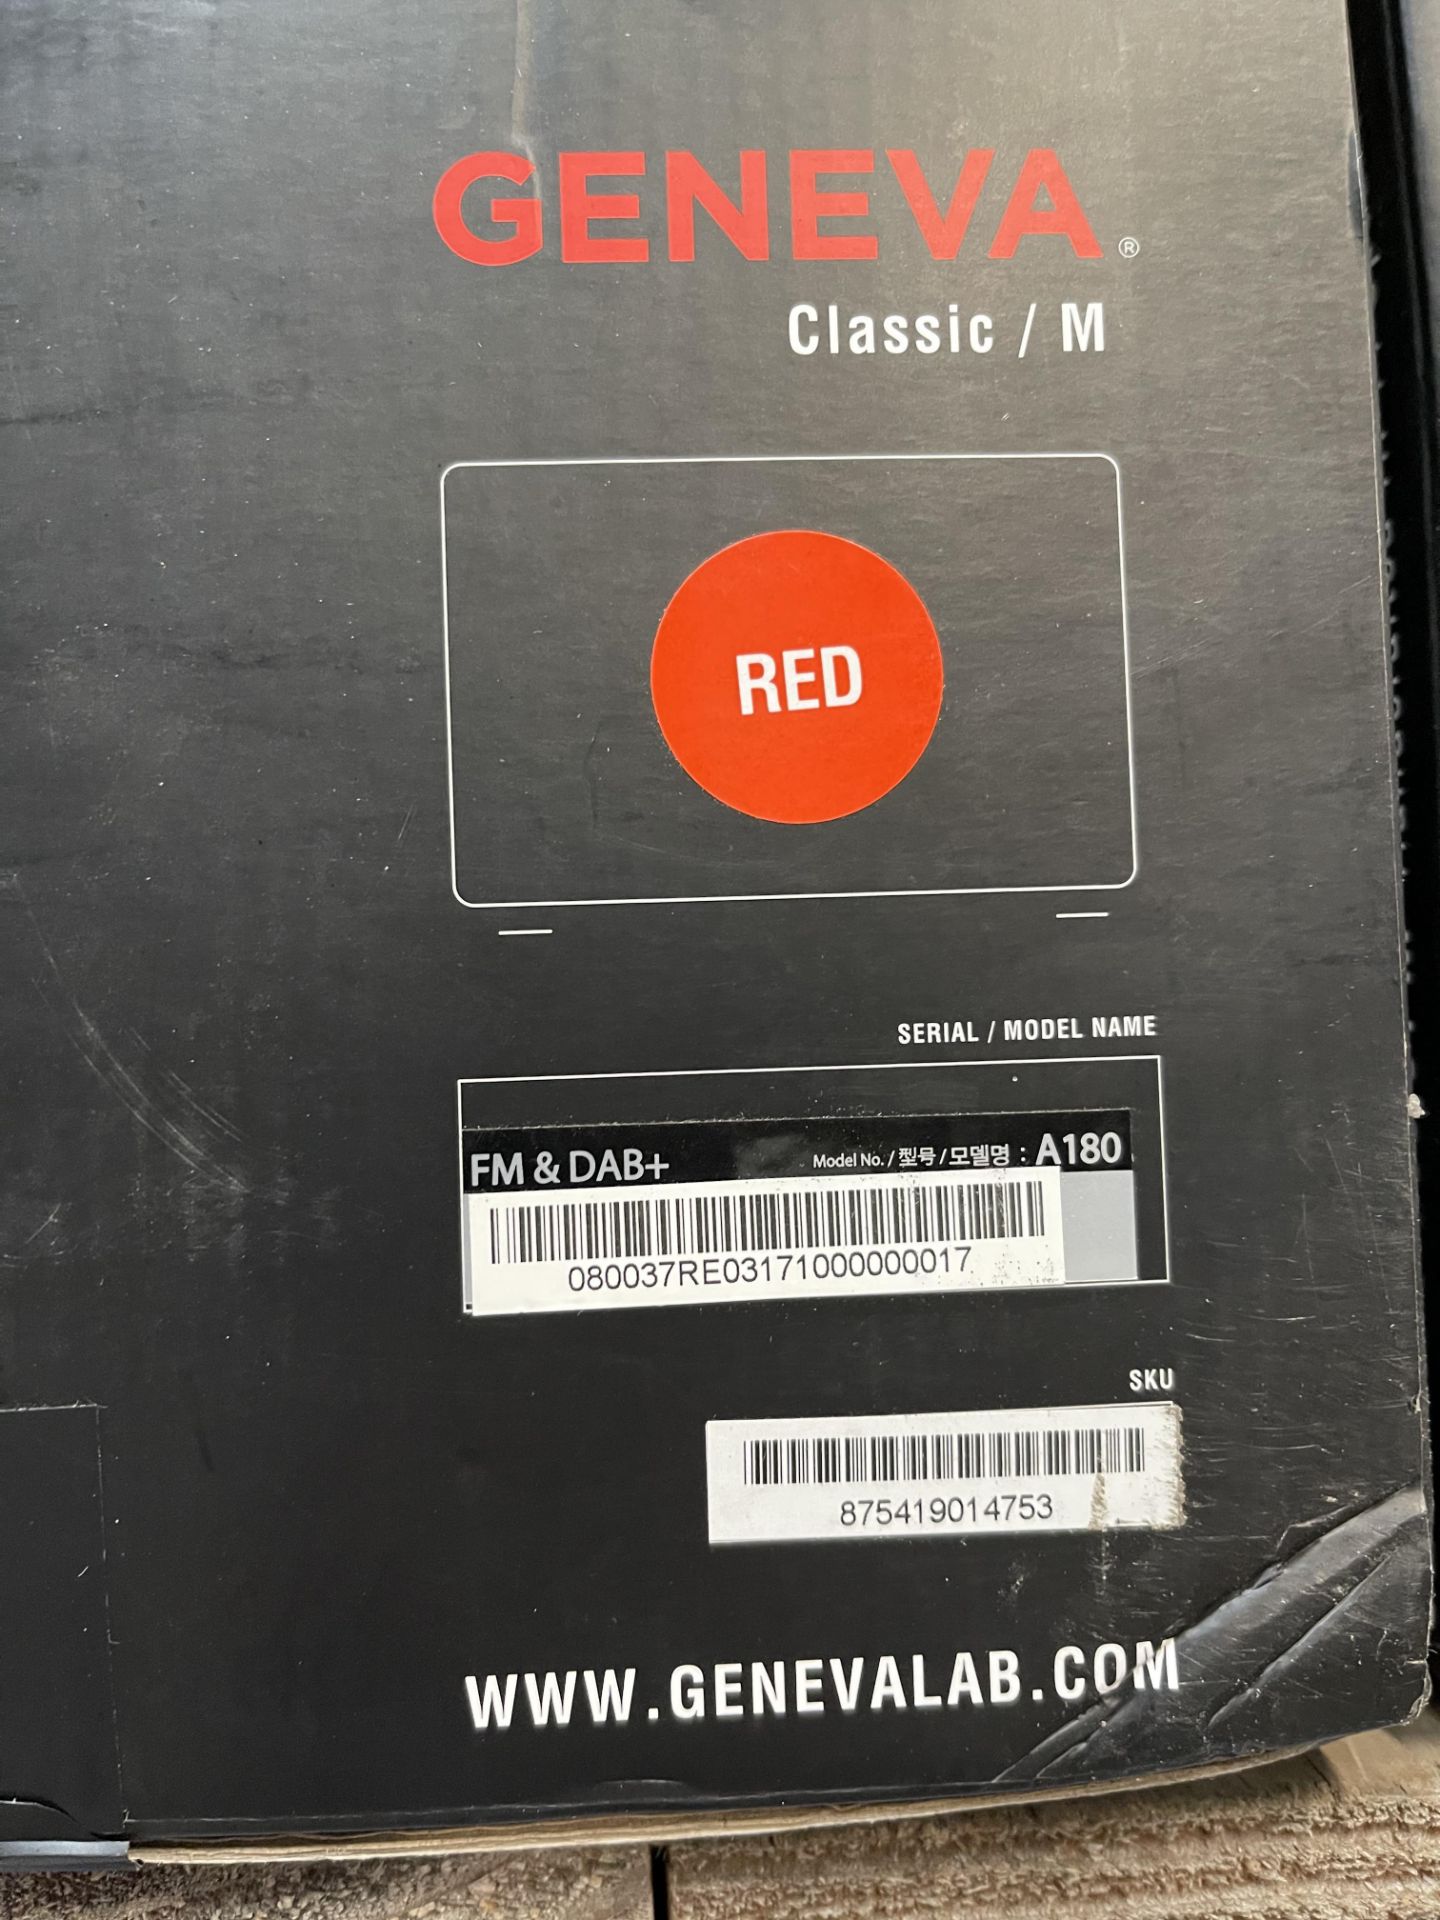 BOXED BRAND NEW GENEVA CLASSIC M A180 SPEAKER, FM & DAB, BLUETOOTH, RED, RRP-£400.00Condition - Image 2 of 2